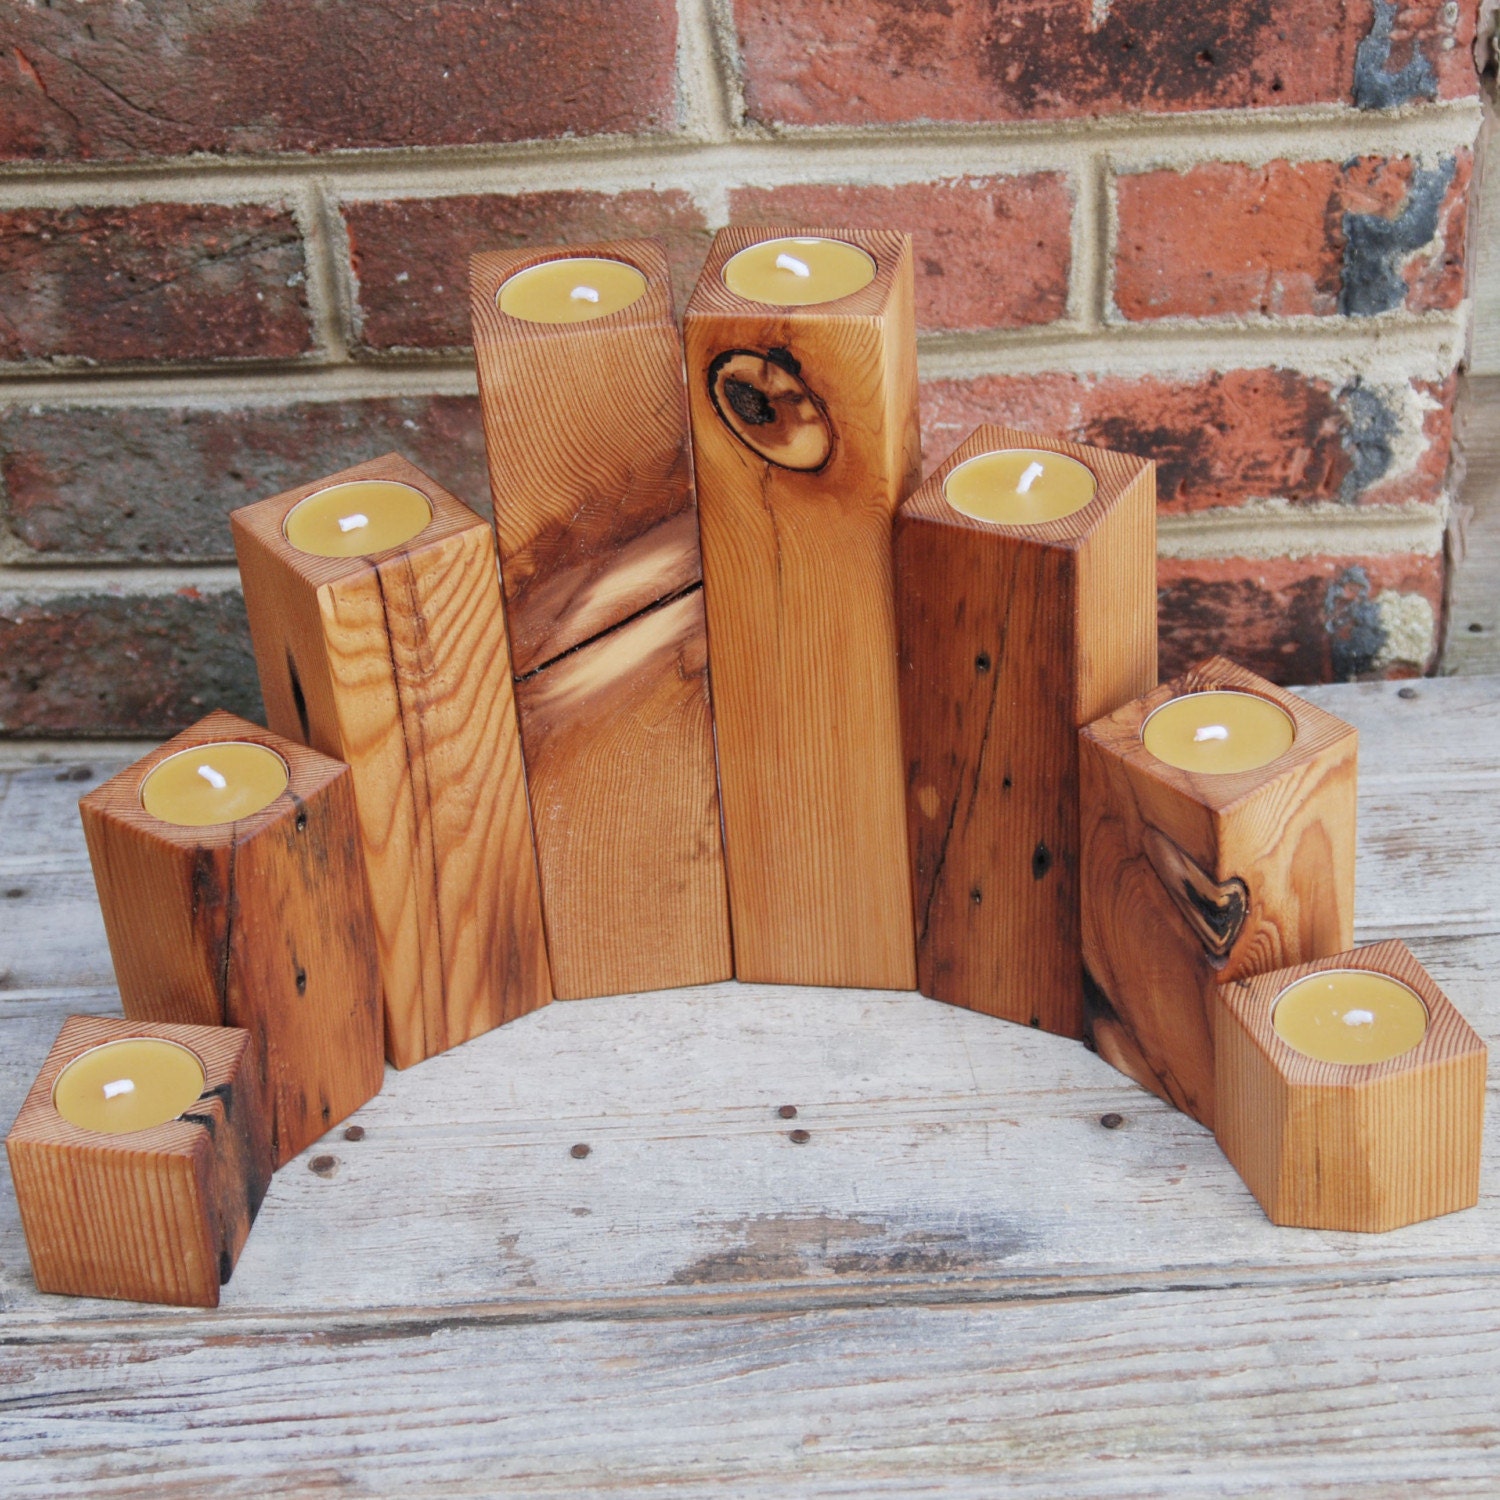 Smoke Stacks - 8 Antique Old Growth Pine Candle Holders with signs of past life